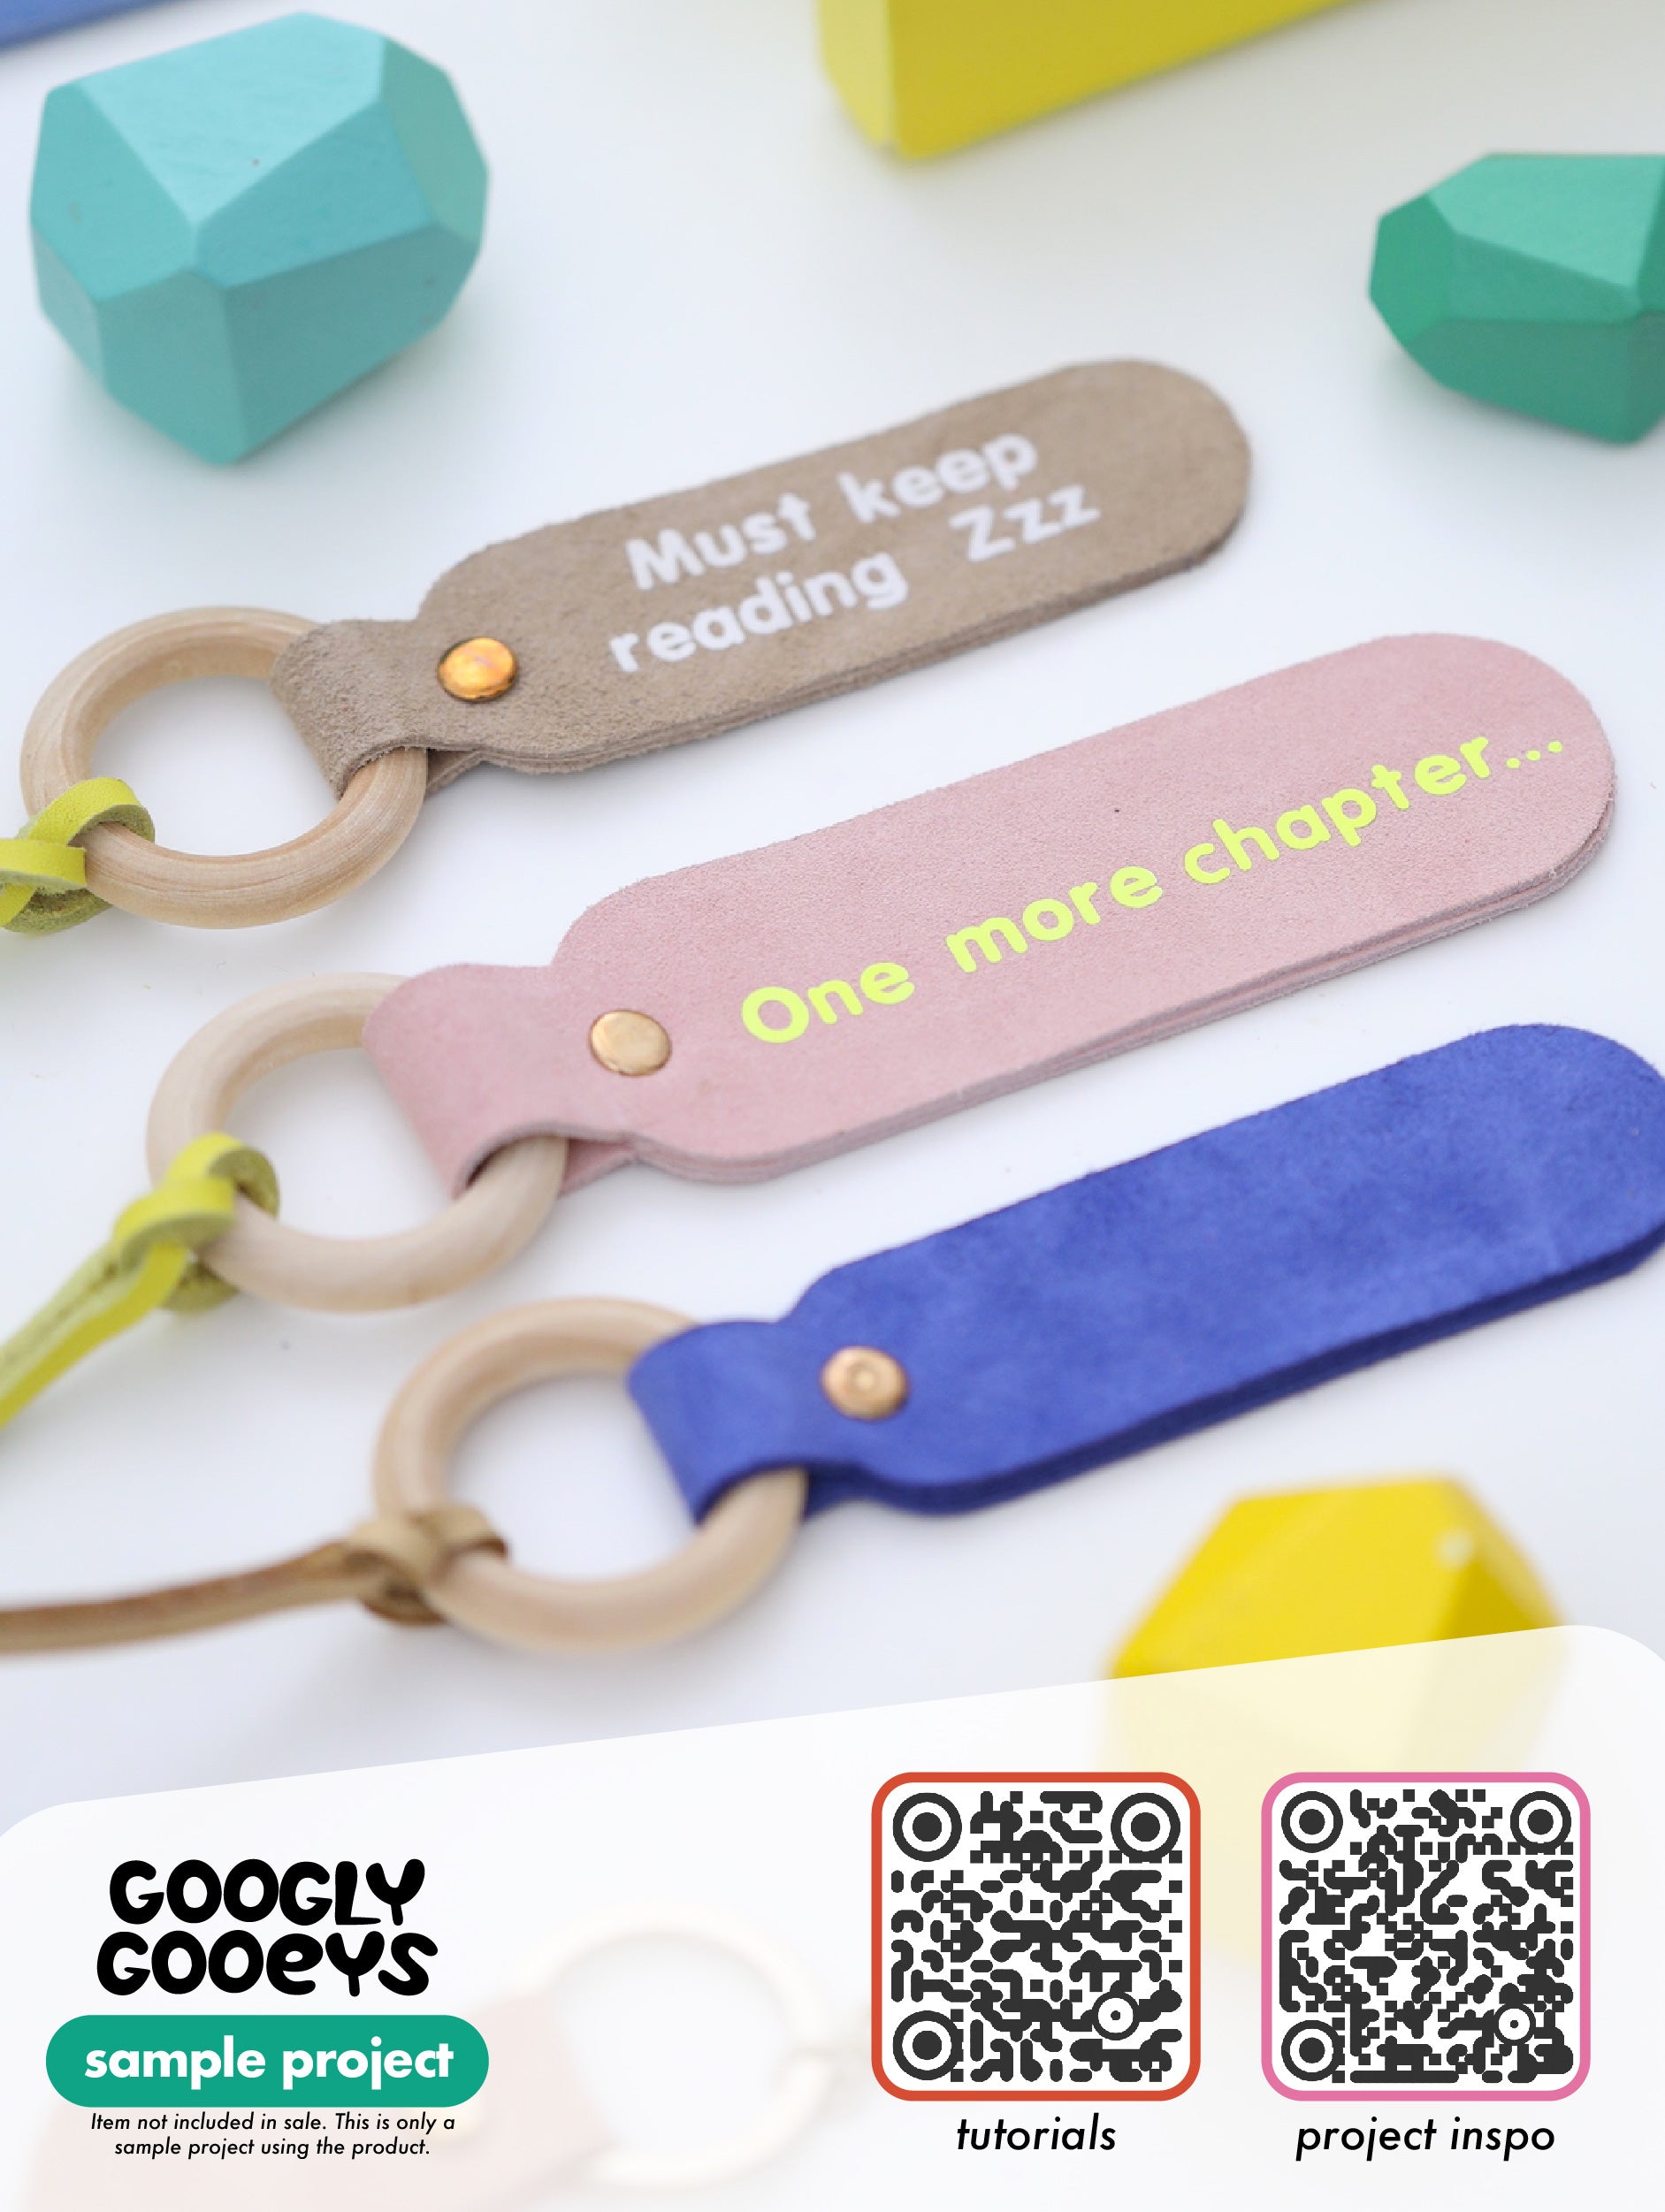 Googly Gooeys Wood Ring Keychain DIY Projects for Crafting